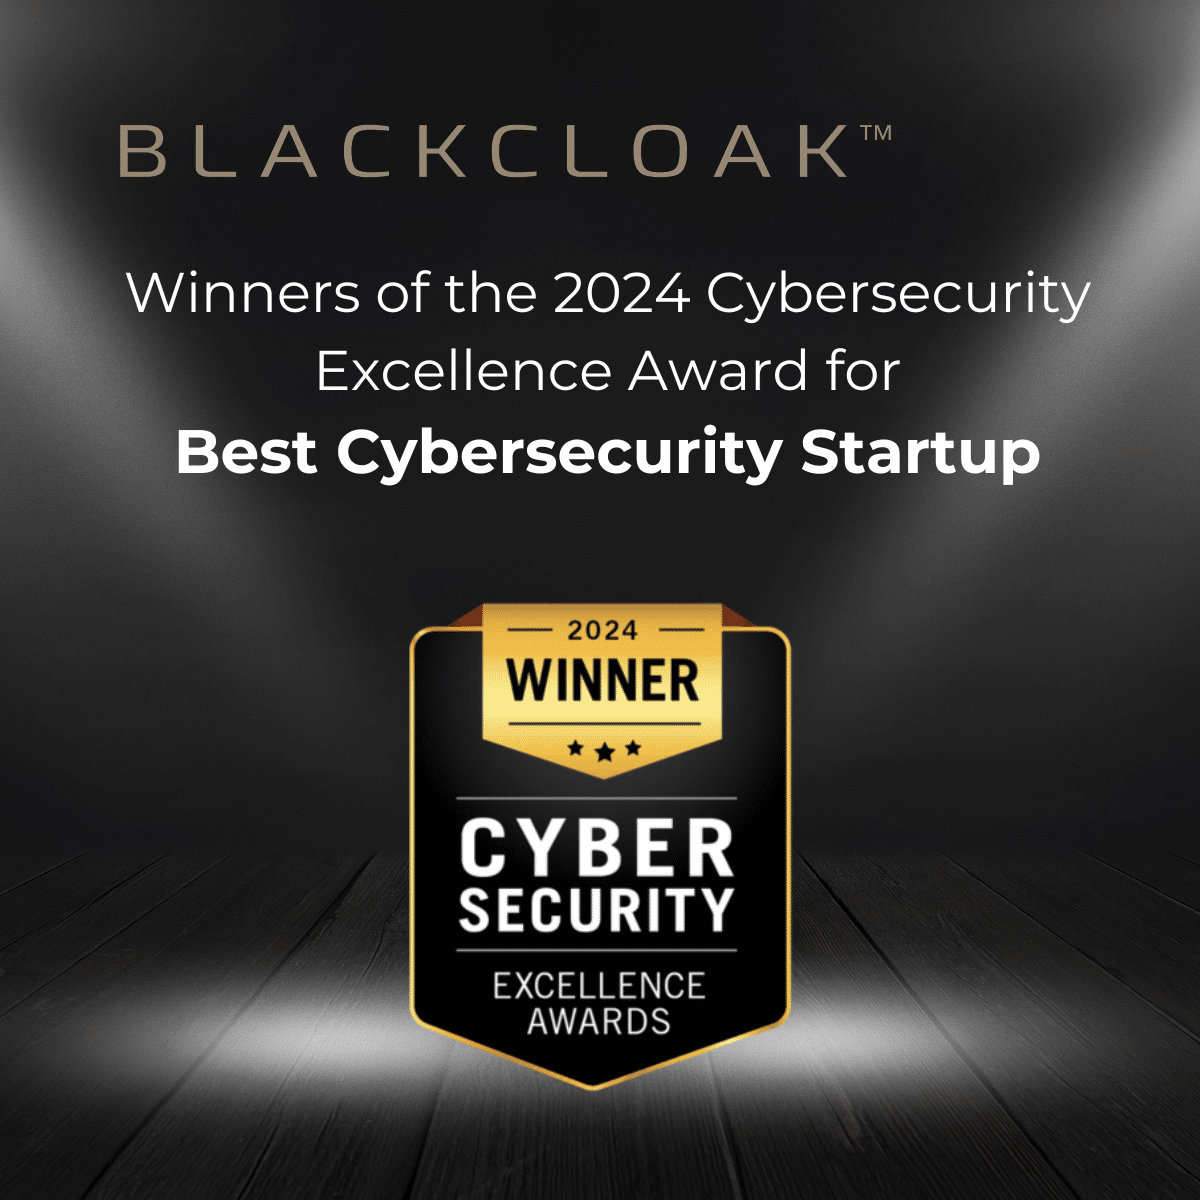 BlackCloak: Winner of the 2024 cybersecurity excellence award for best cybersecurity startup